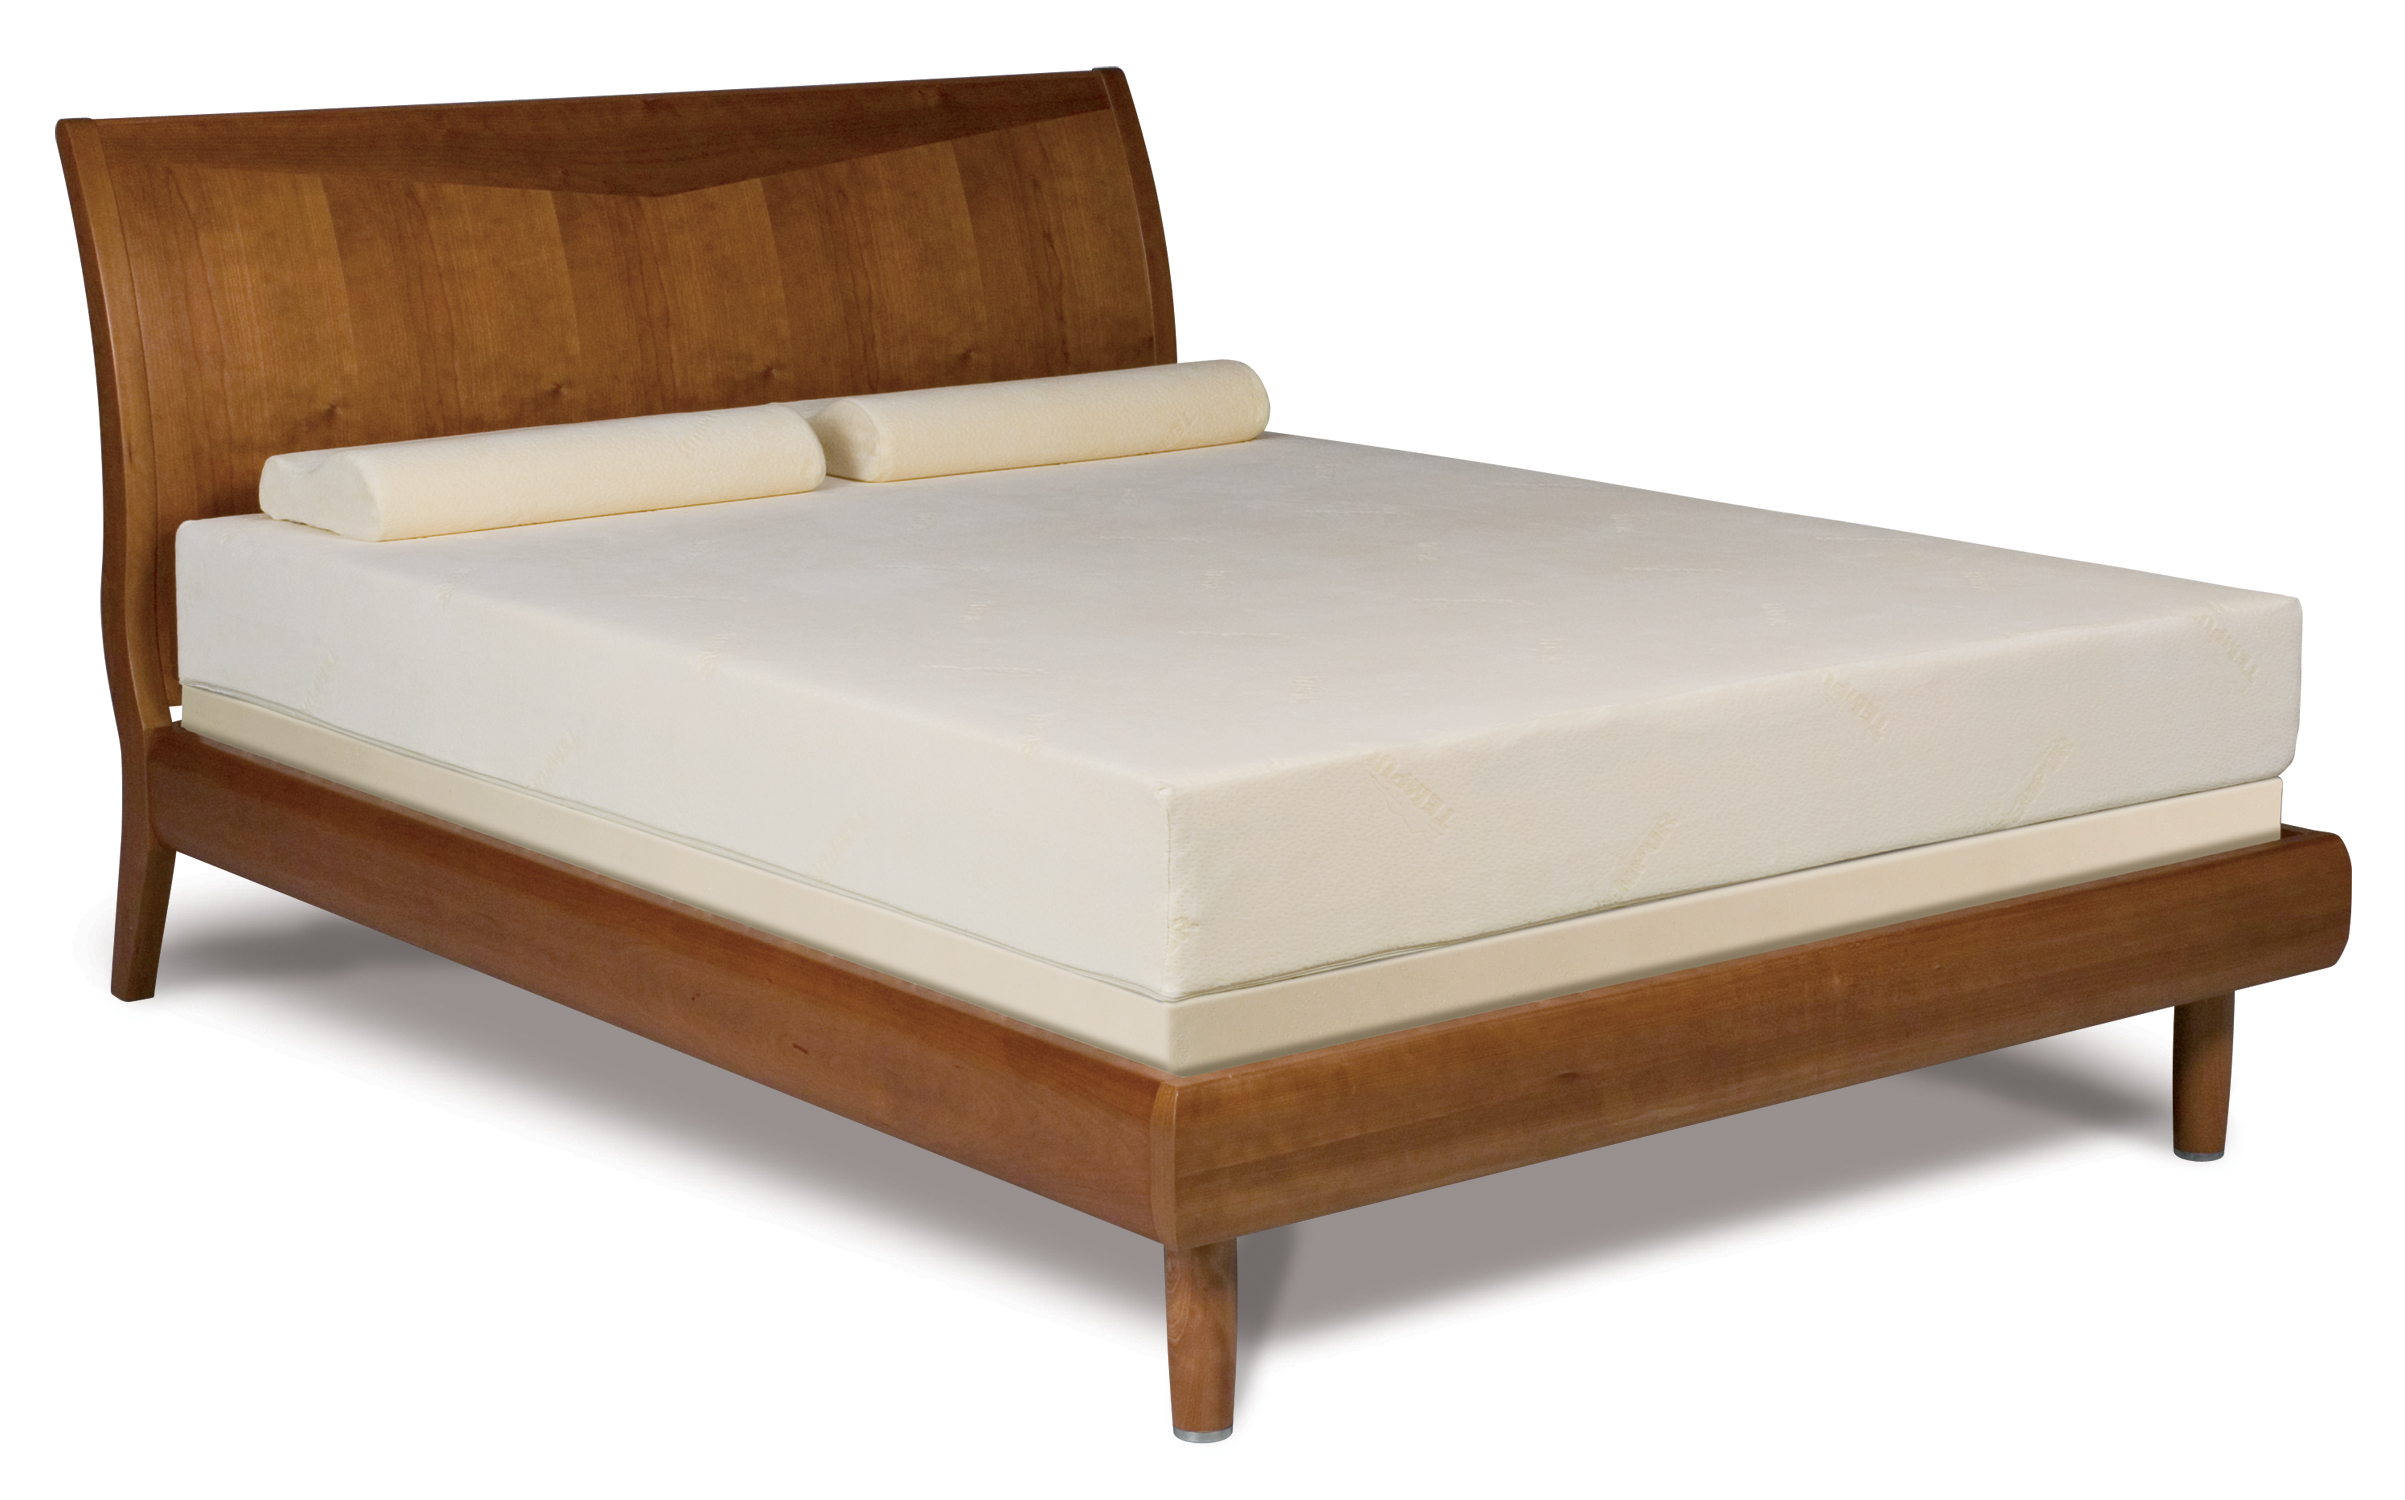 The ClassicBed by Tempur